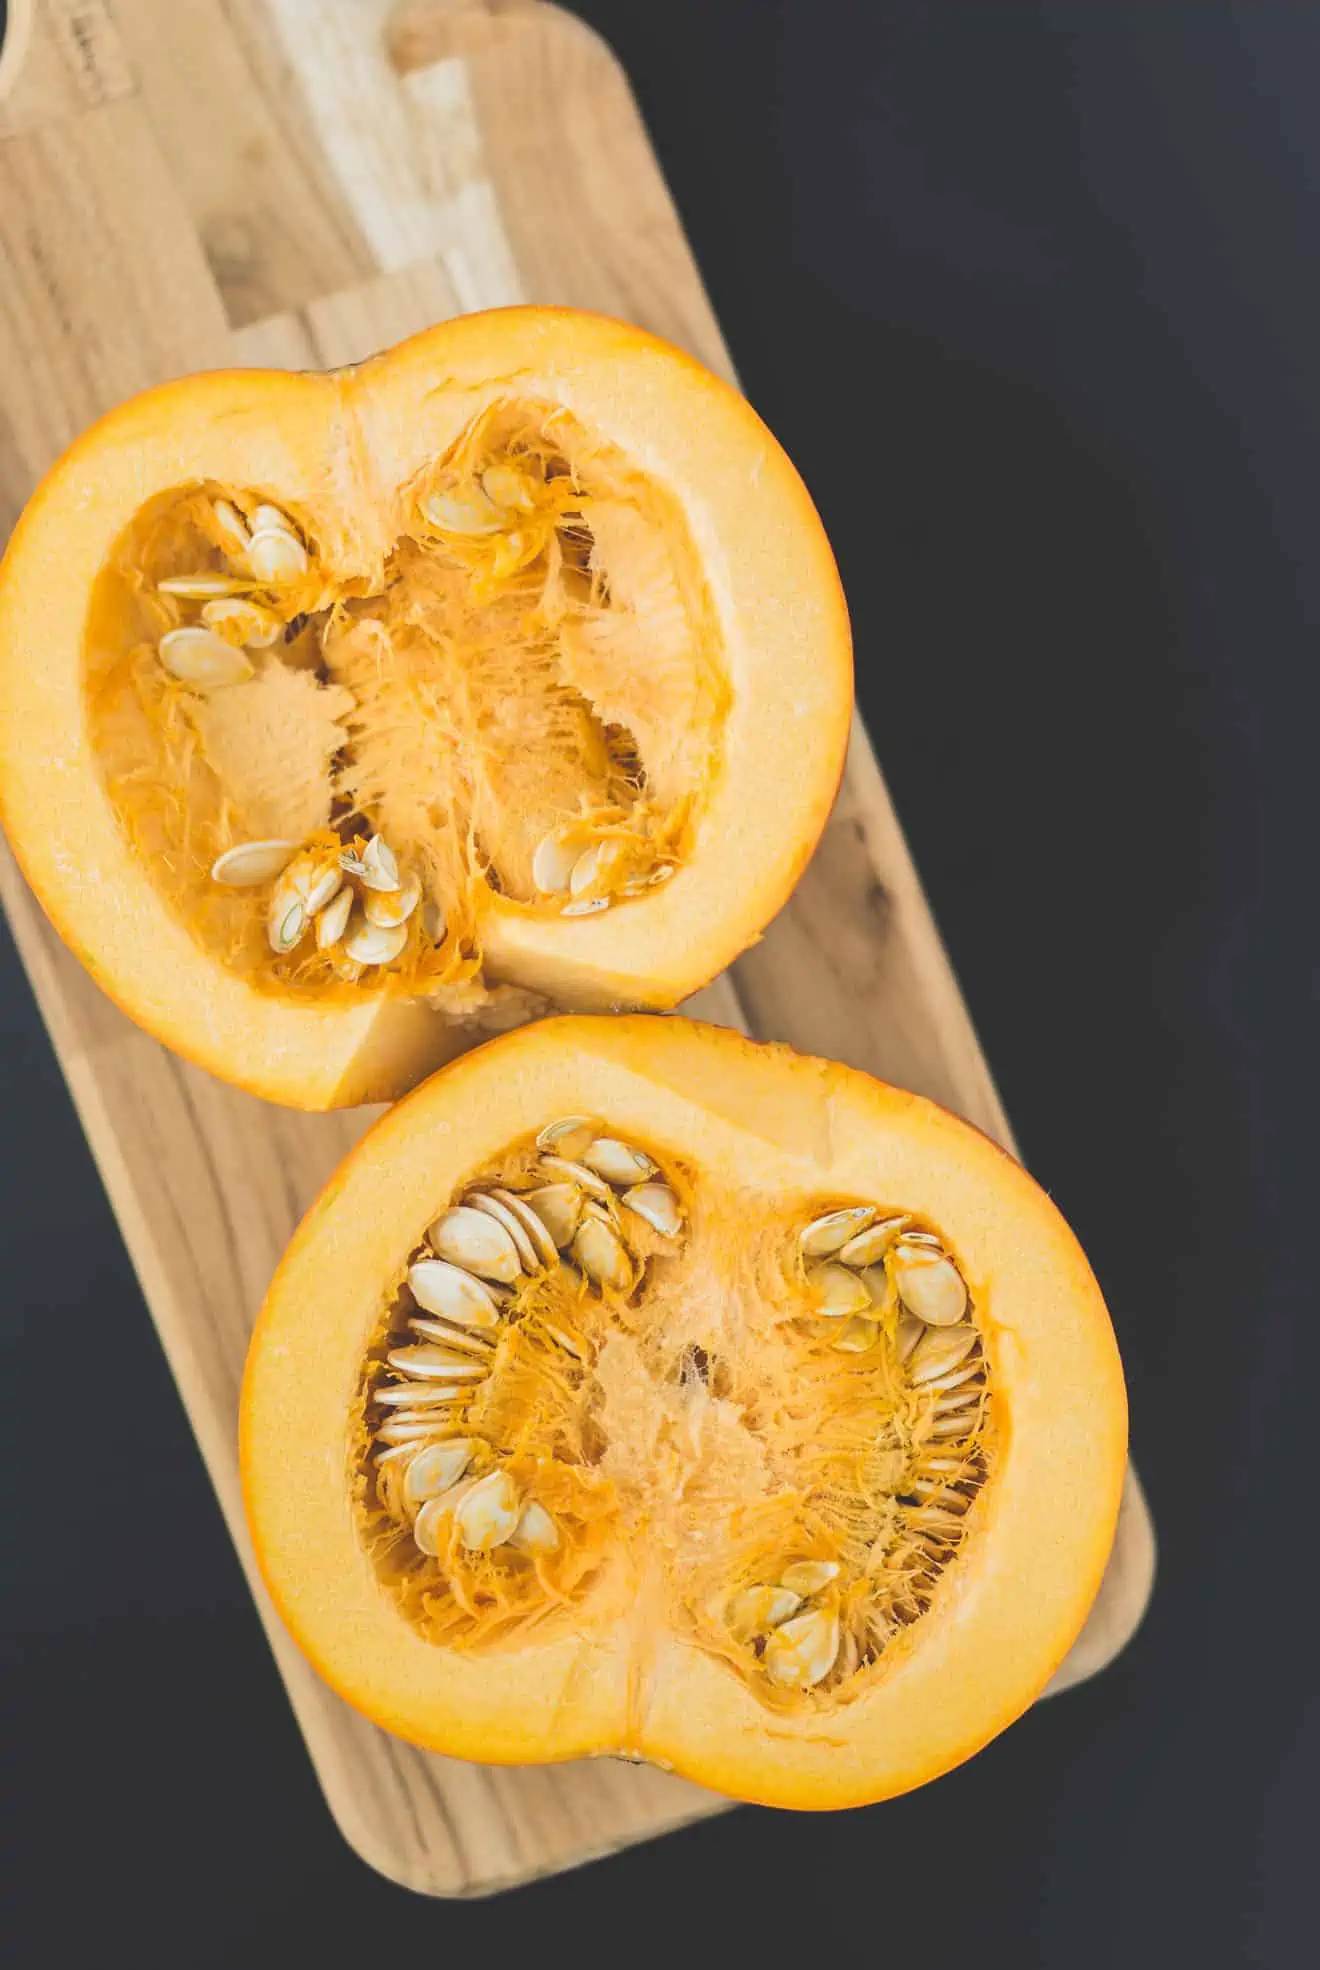 a small pumpkin cut in half with the seeds showing on a cutting board.